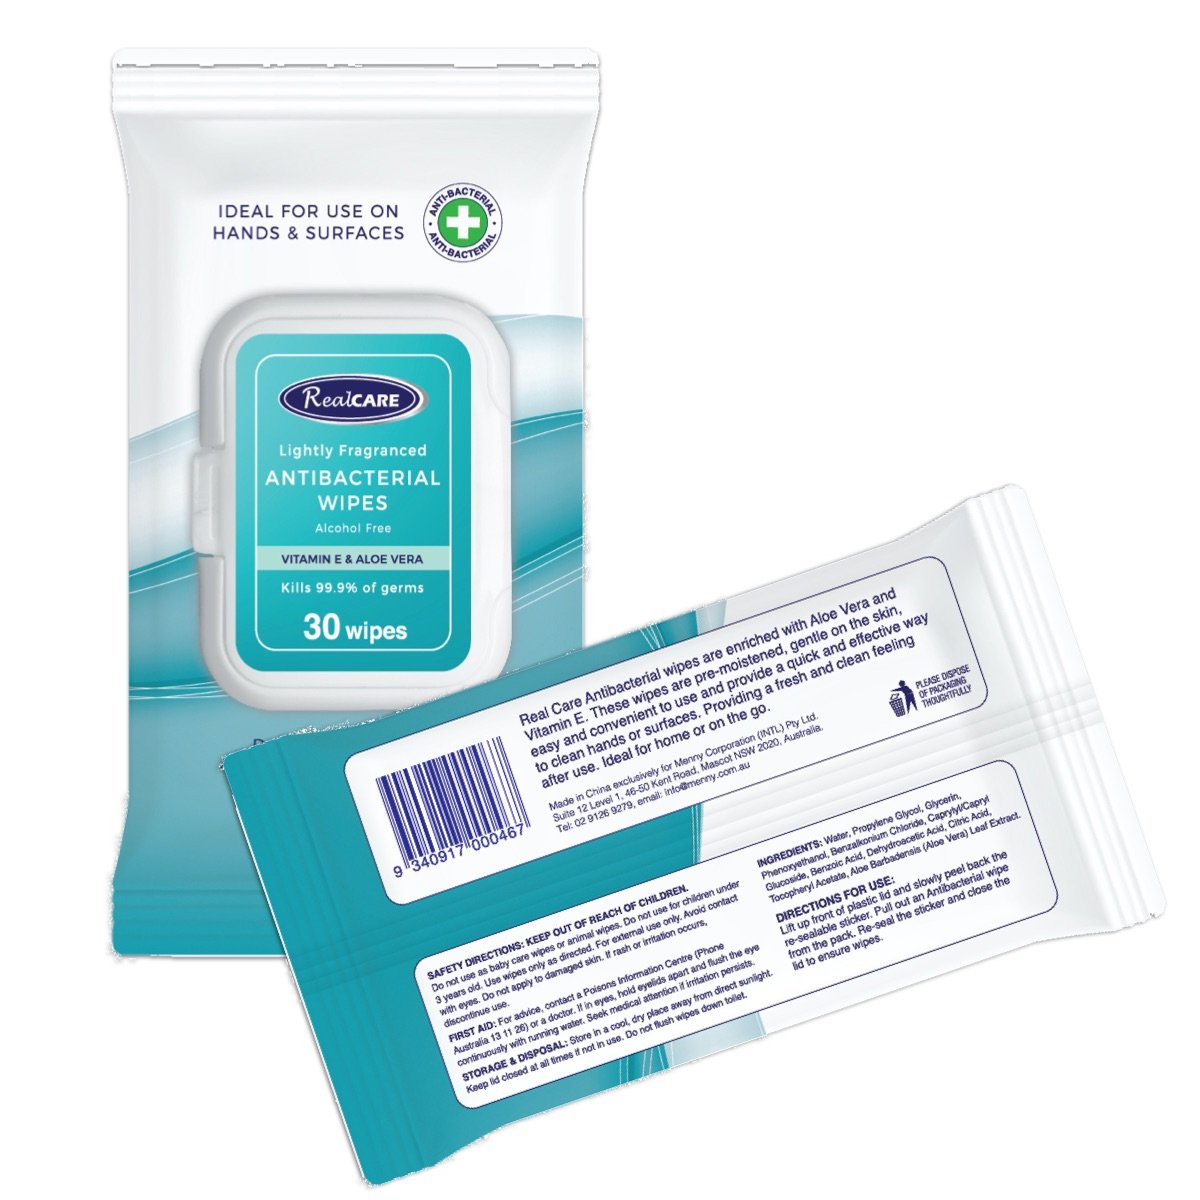 Antibacterial Alcohol-Free Hand Wipes Kills 99.9% of Germs 30 Wipes Tactical Gear Tactical Gear Supplier Tactical Distributors Australia